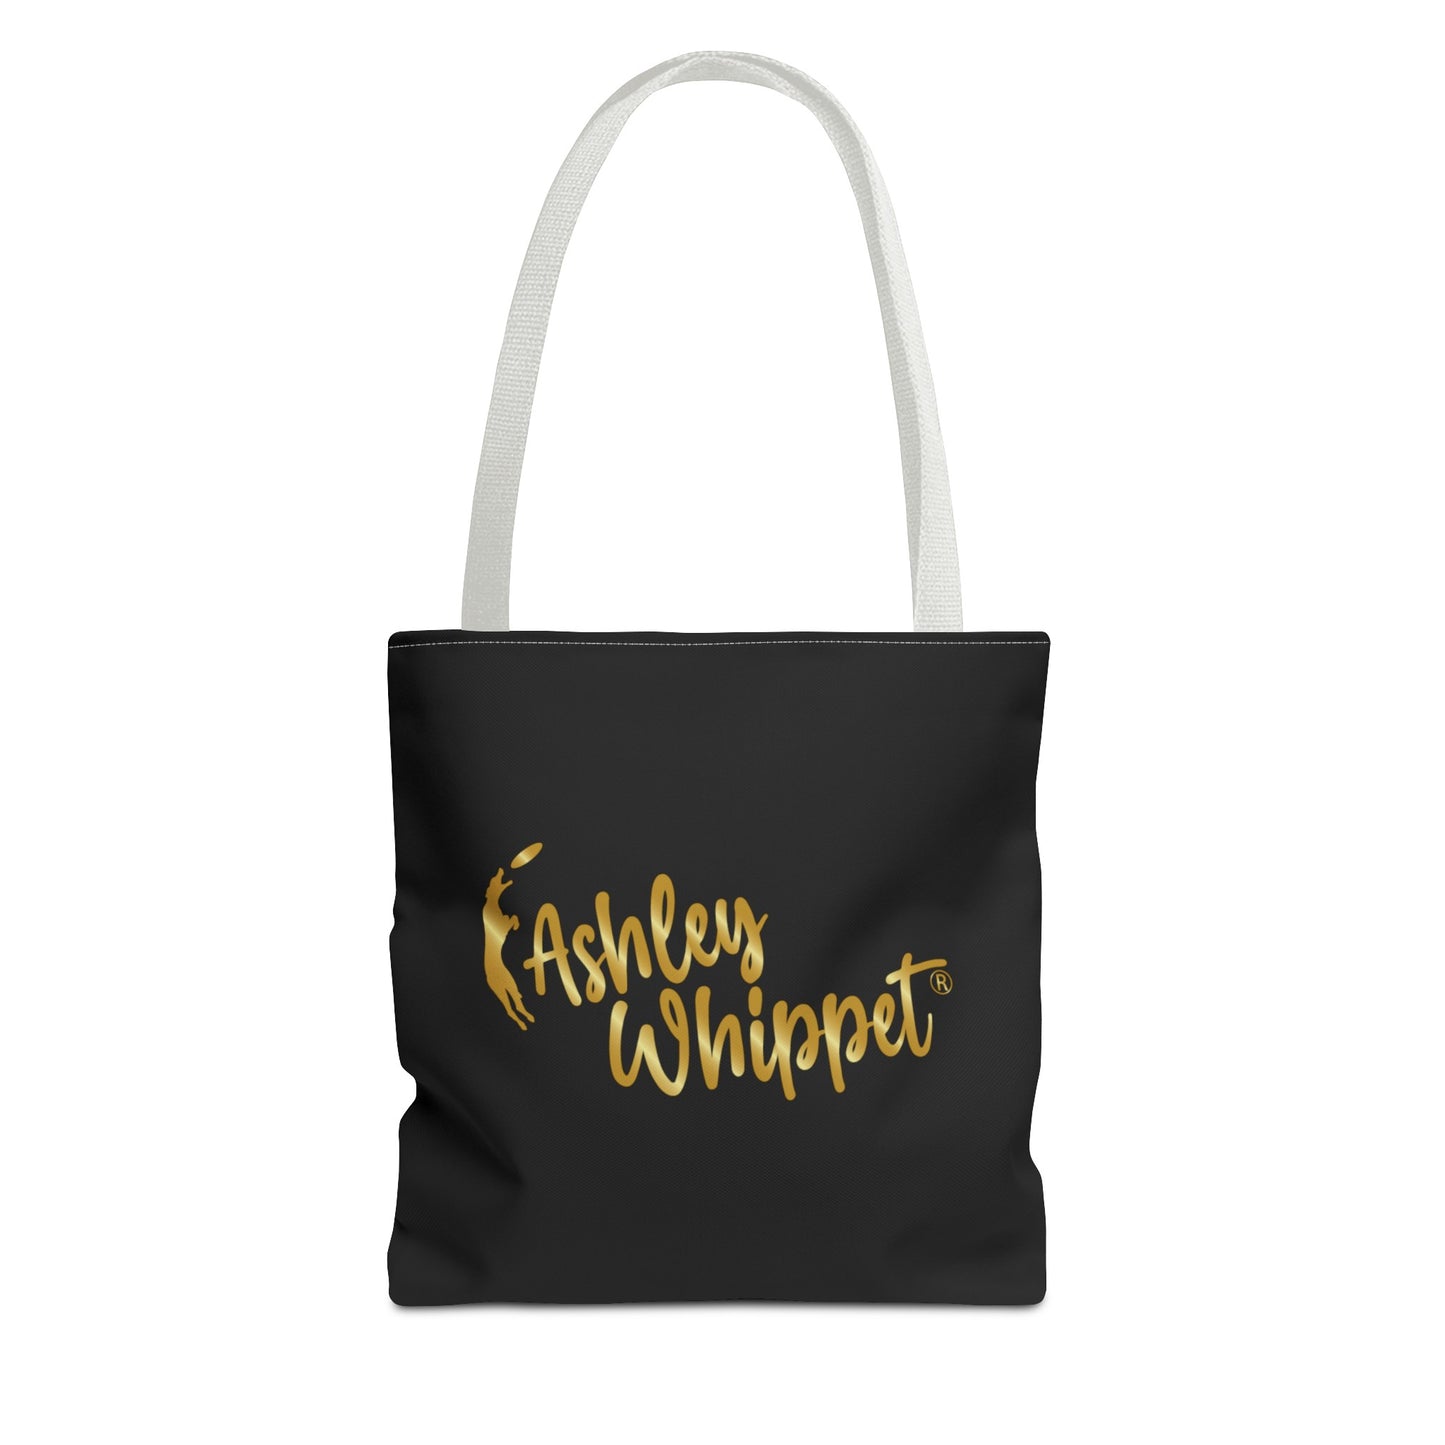 ASHLEY WHIPPET Tote Bag